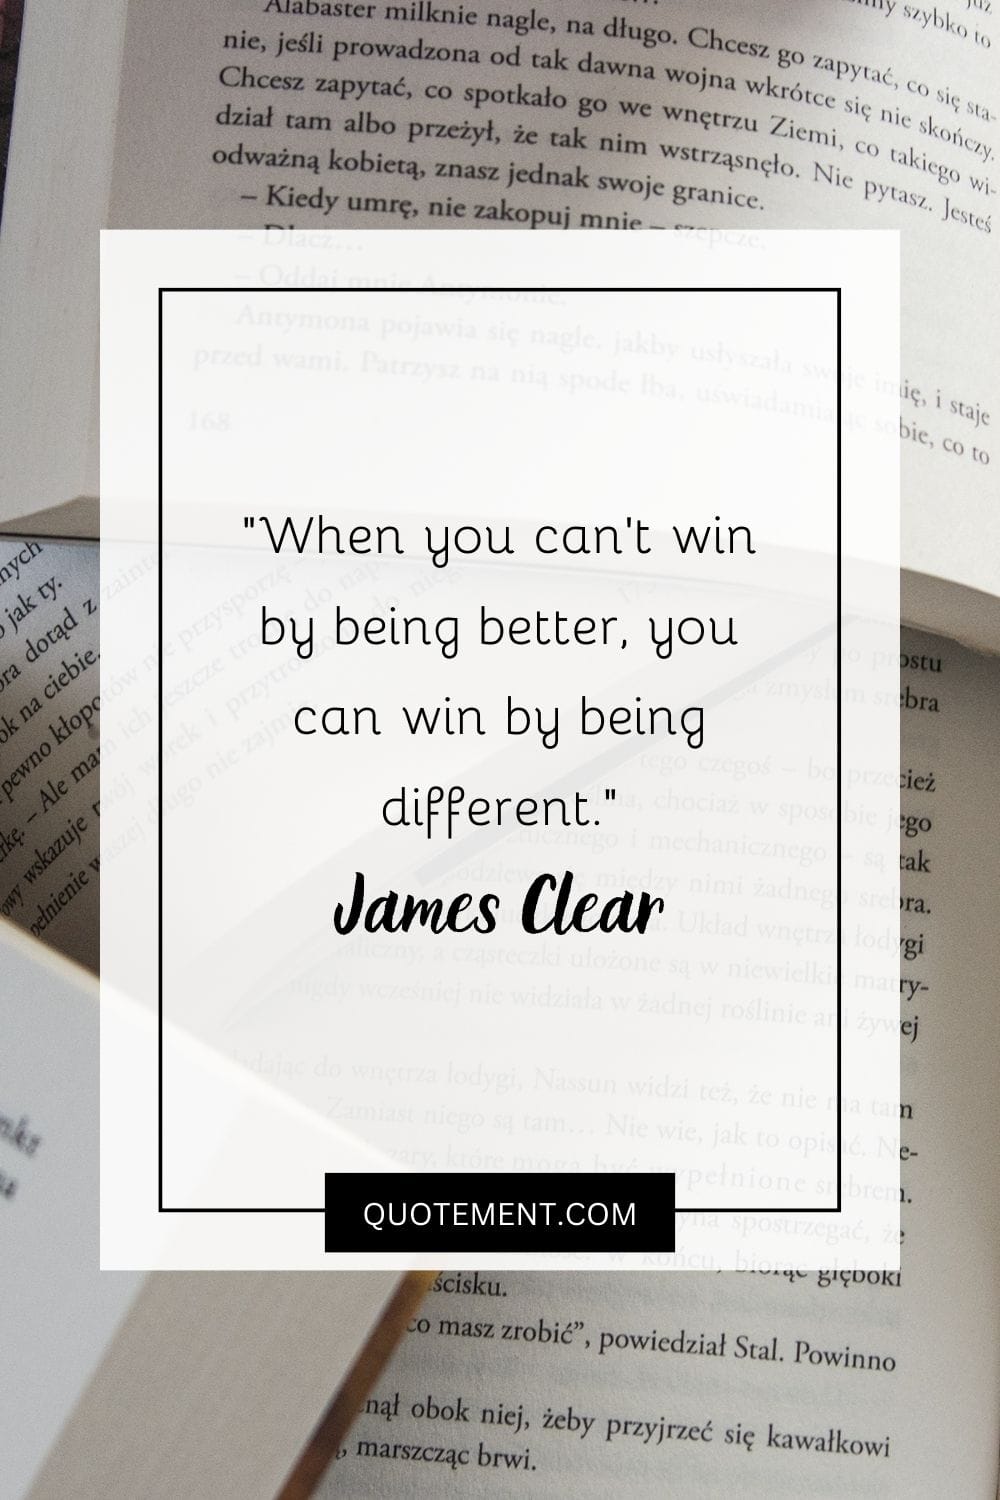 When you can’t win by being better, you can win by being different.